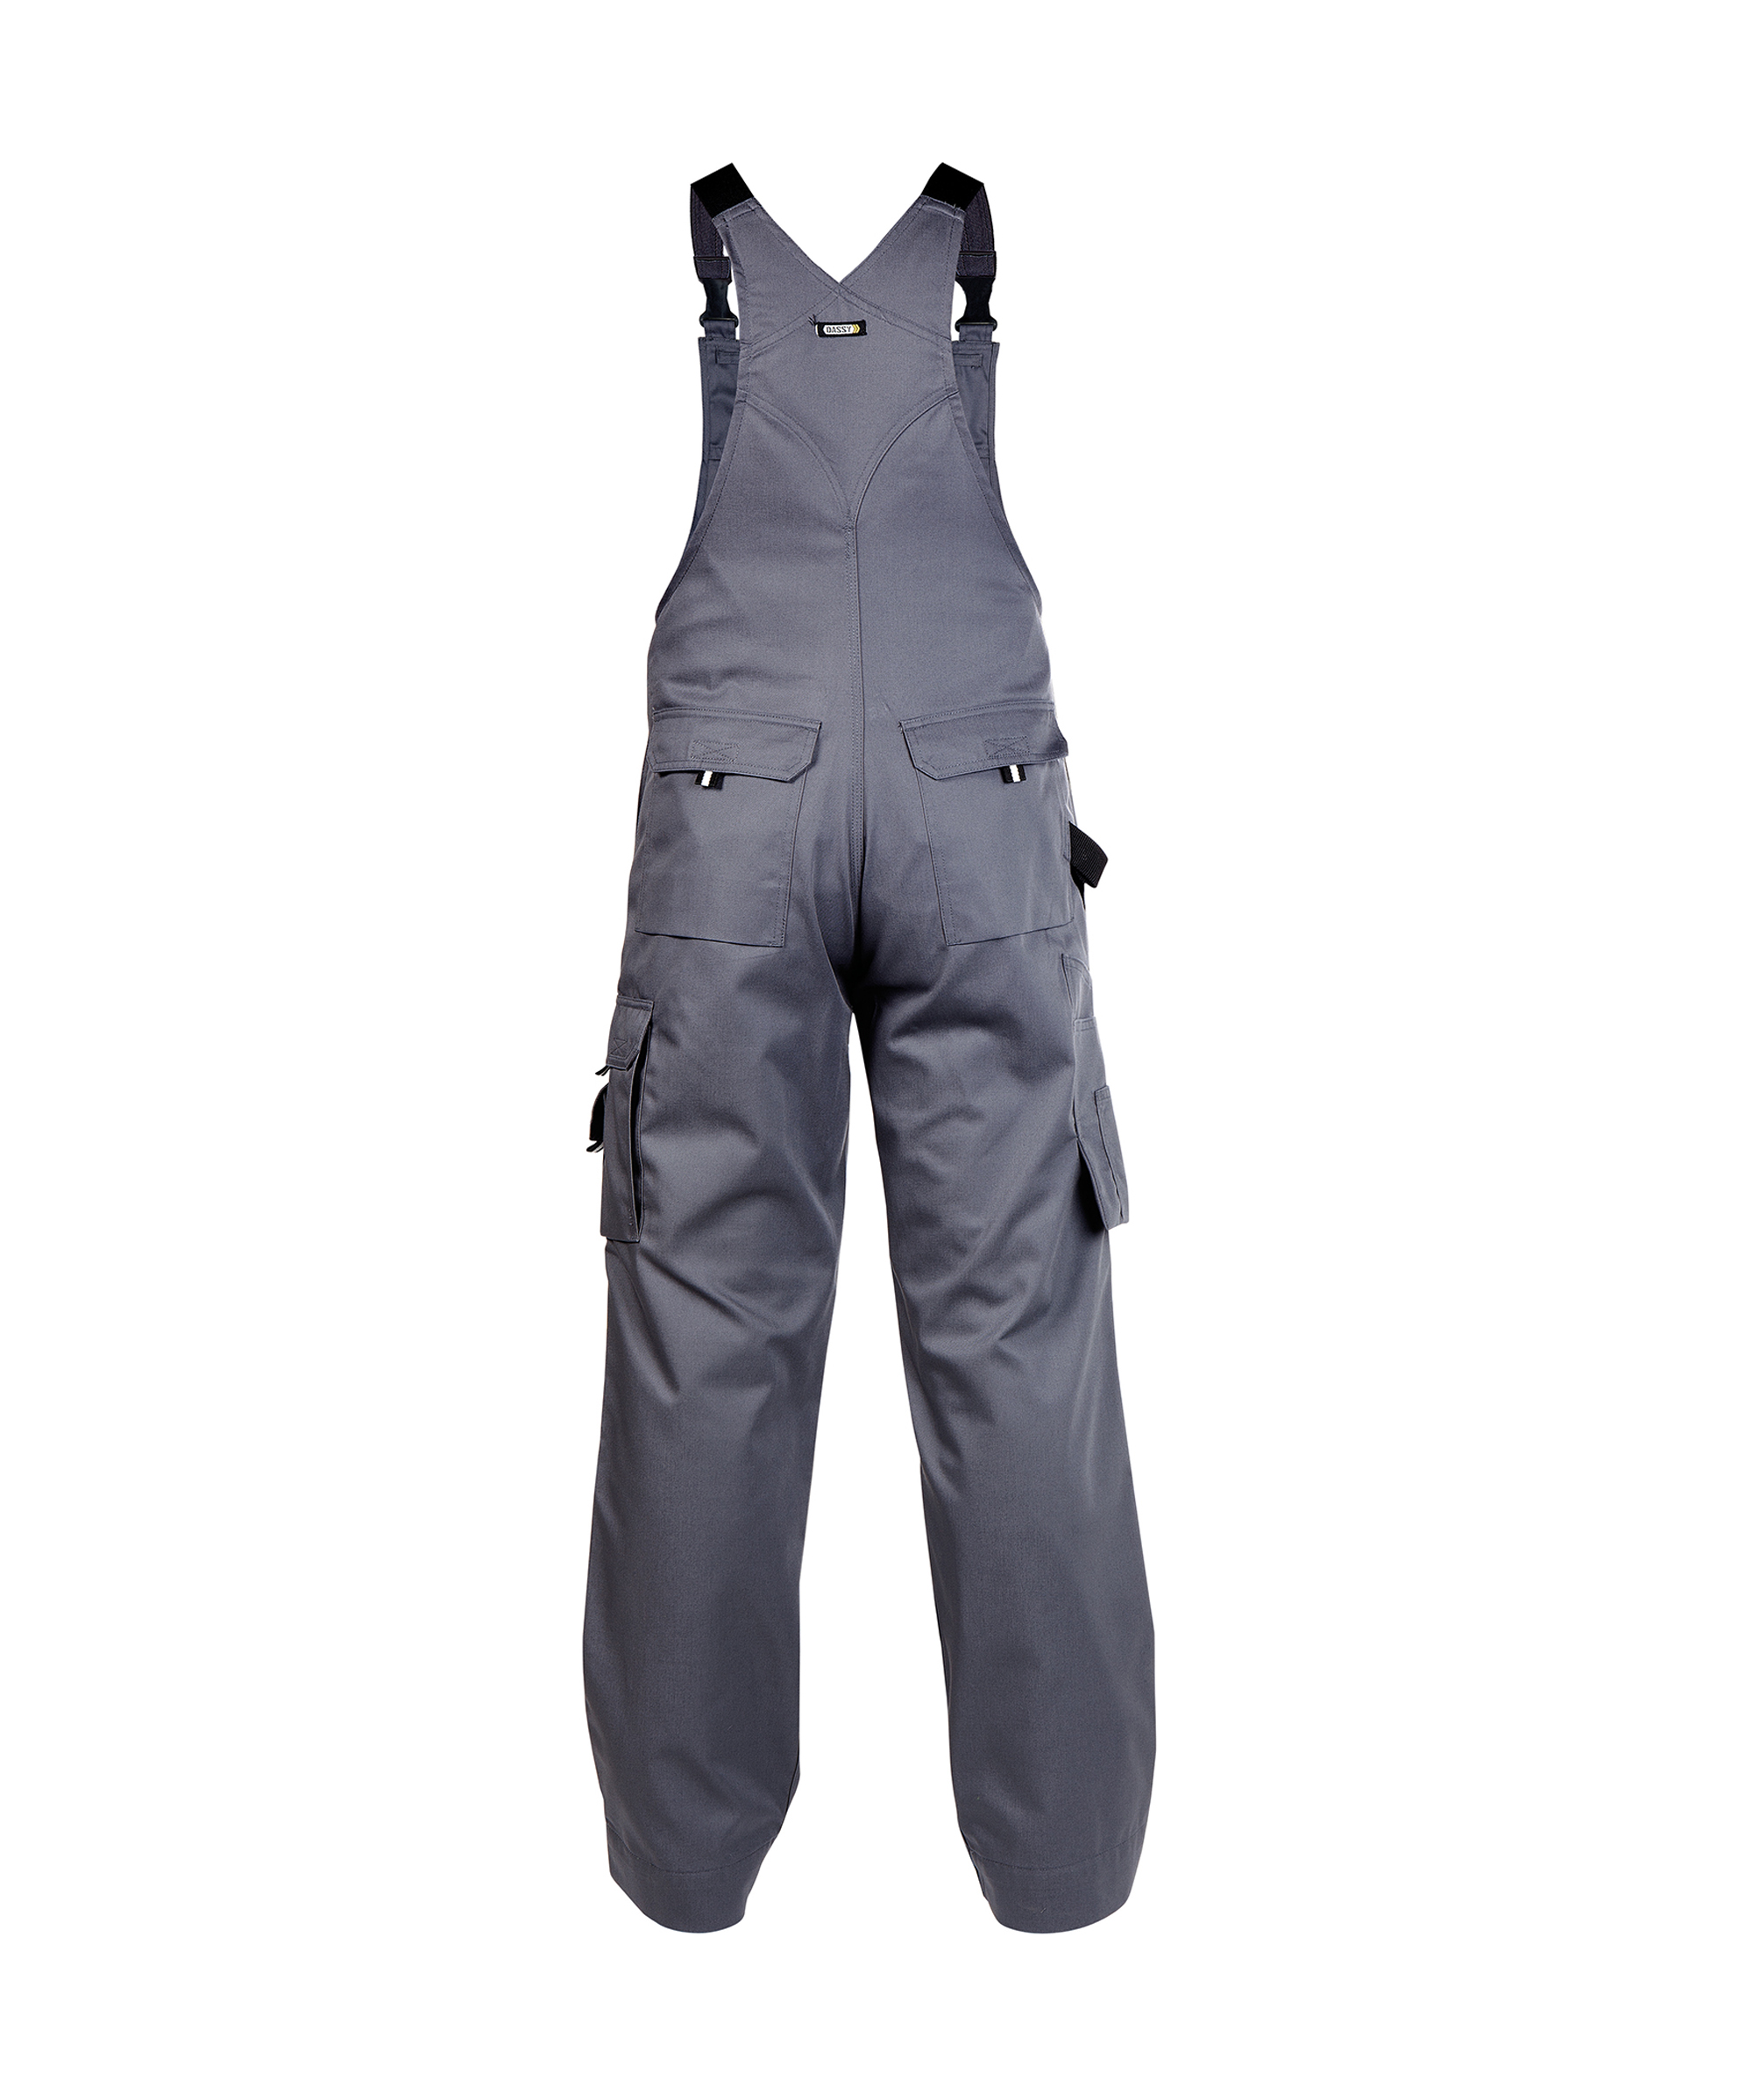 ventura_brace-overall-with-knee-pockets_cement-grey_back.jpg